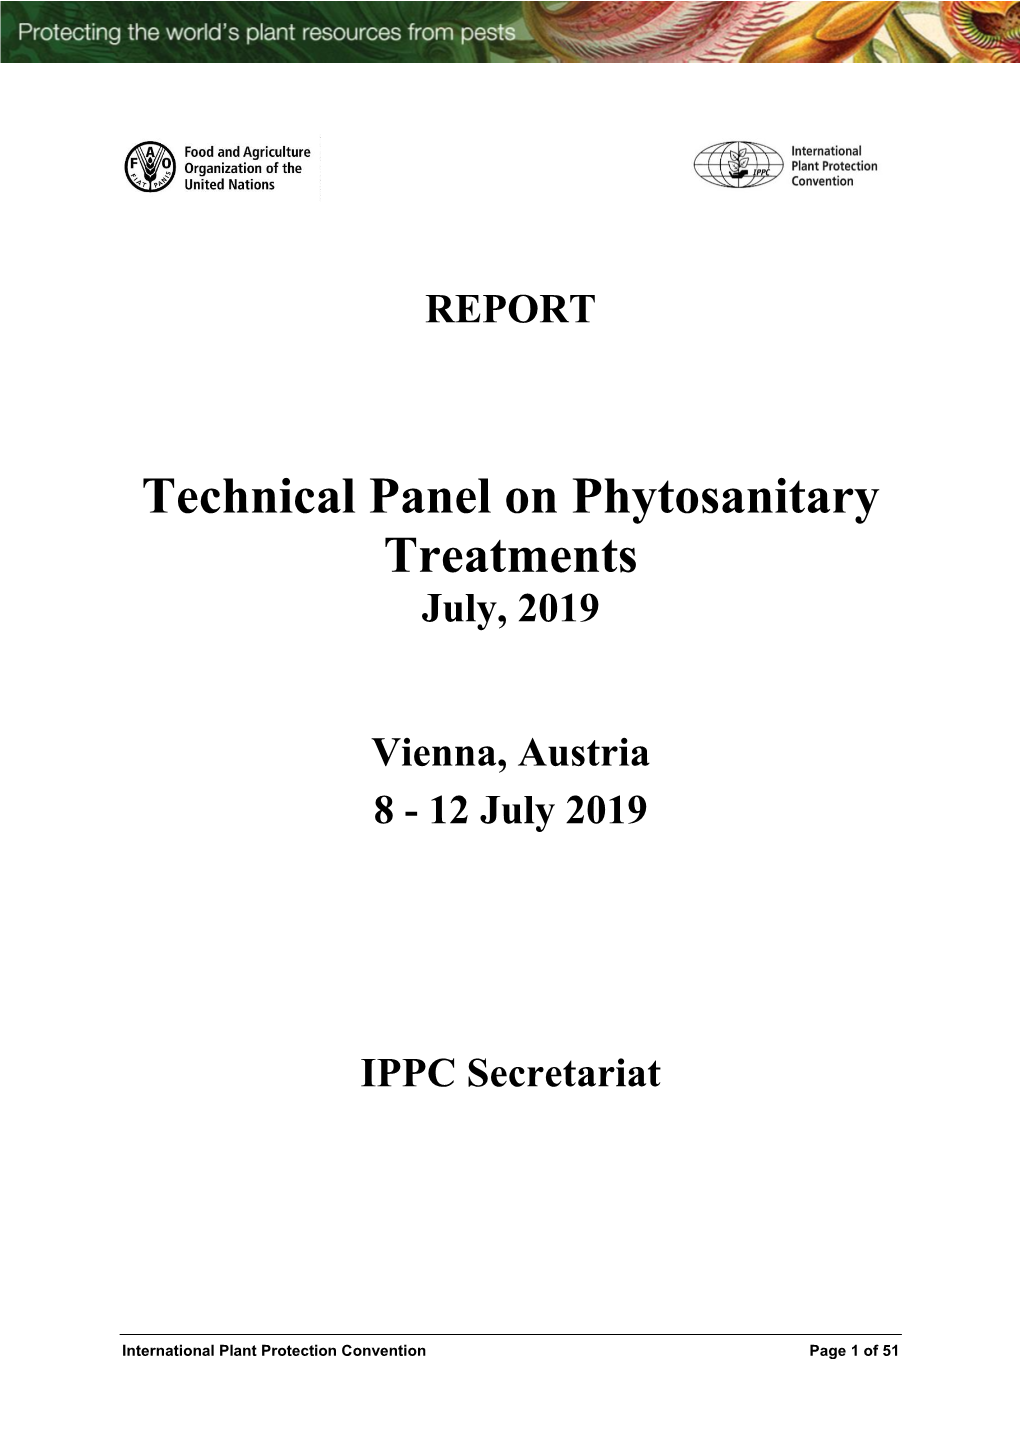 Technical Panel on Phytosanitary Treatments July, 2019